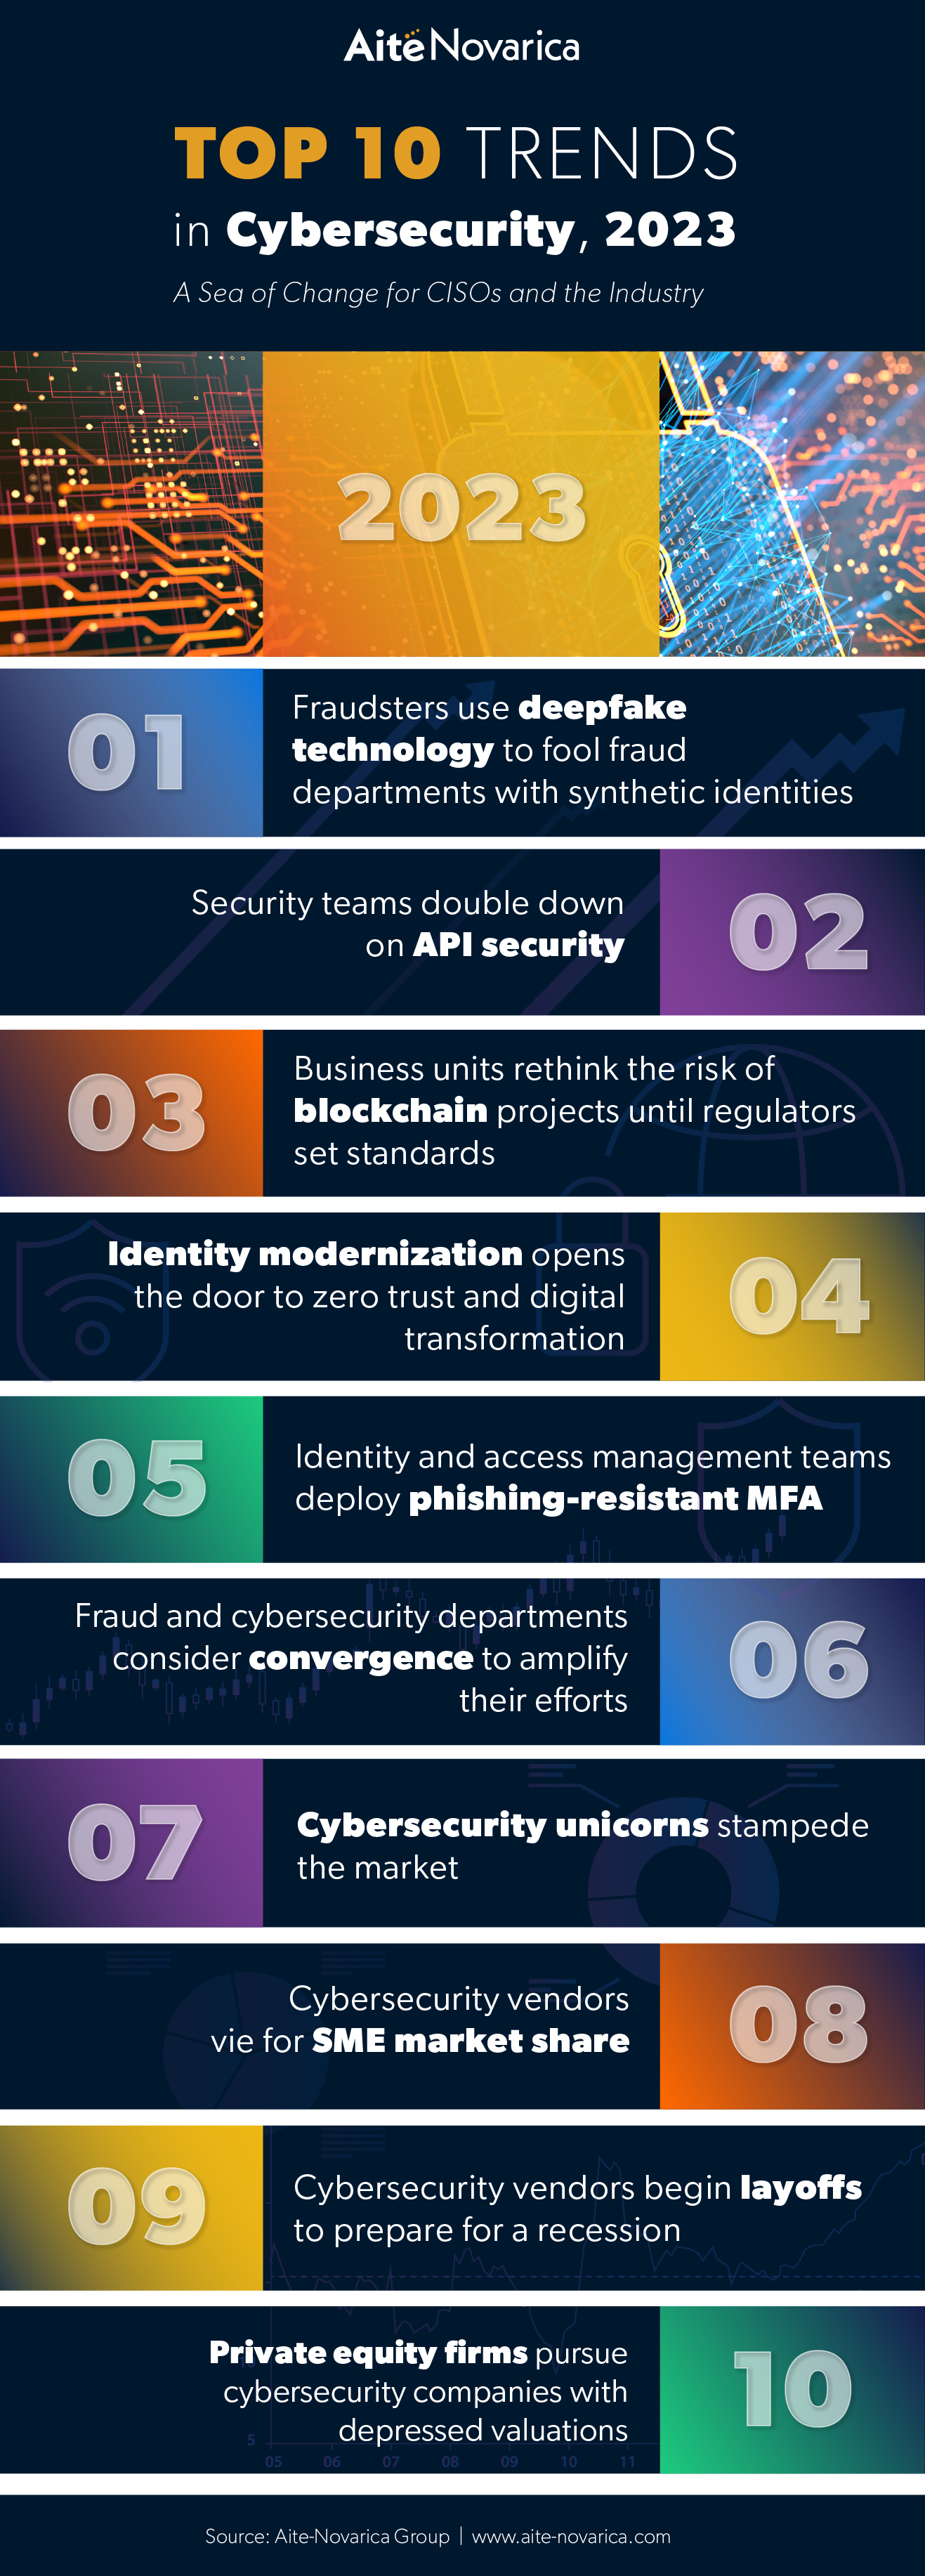 Top 10 Trends in Cybersecurity, 2023 A Sea of Change for the Industry